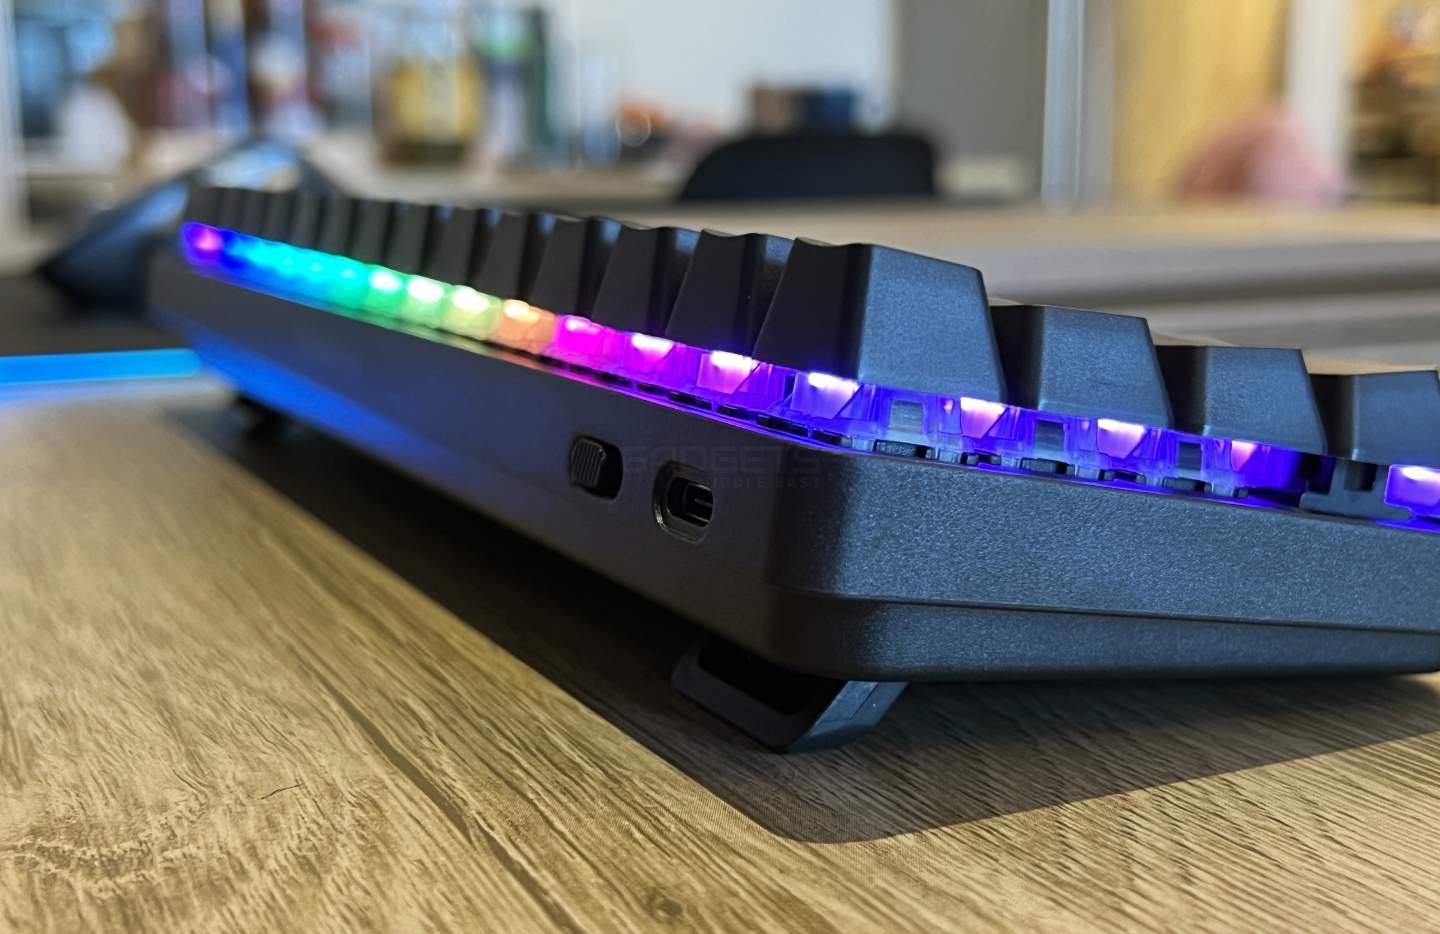 SteelSeries Apex Pro Mini Wireless Gaming Keyboard Review